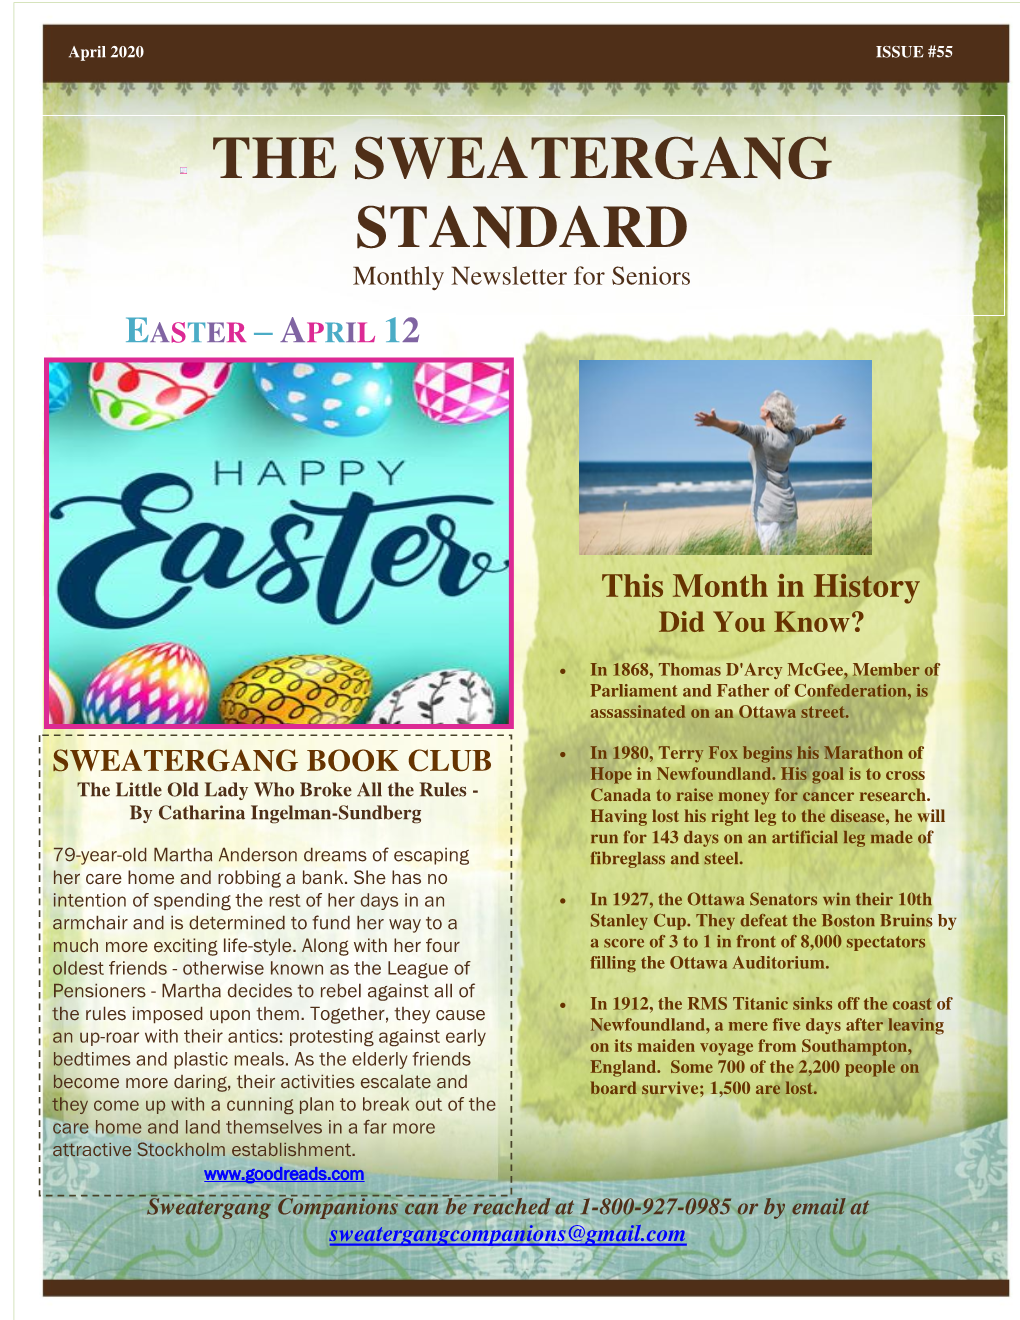 THE SWEATERGANG STANDARD Monthly Newsletter for Seniors